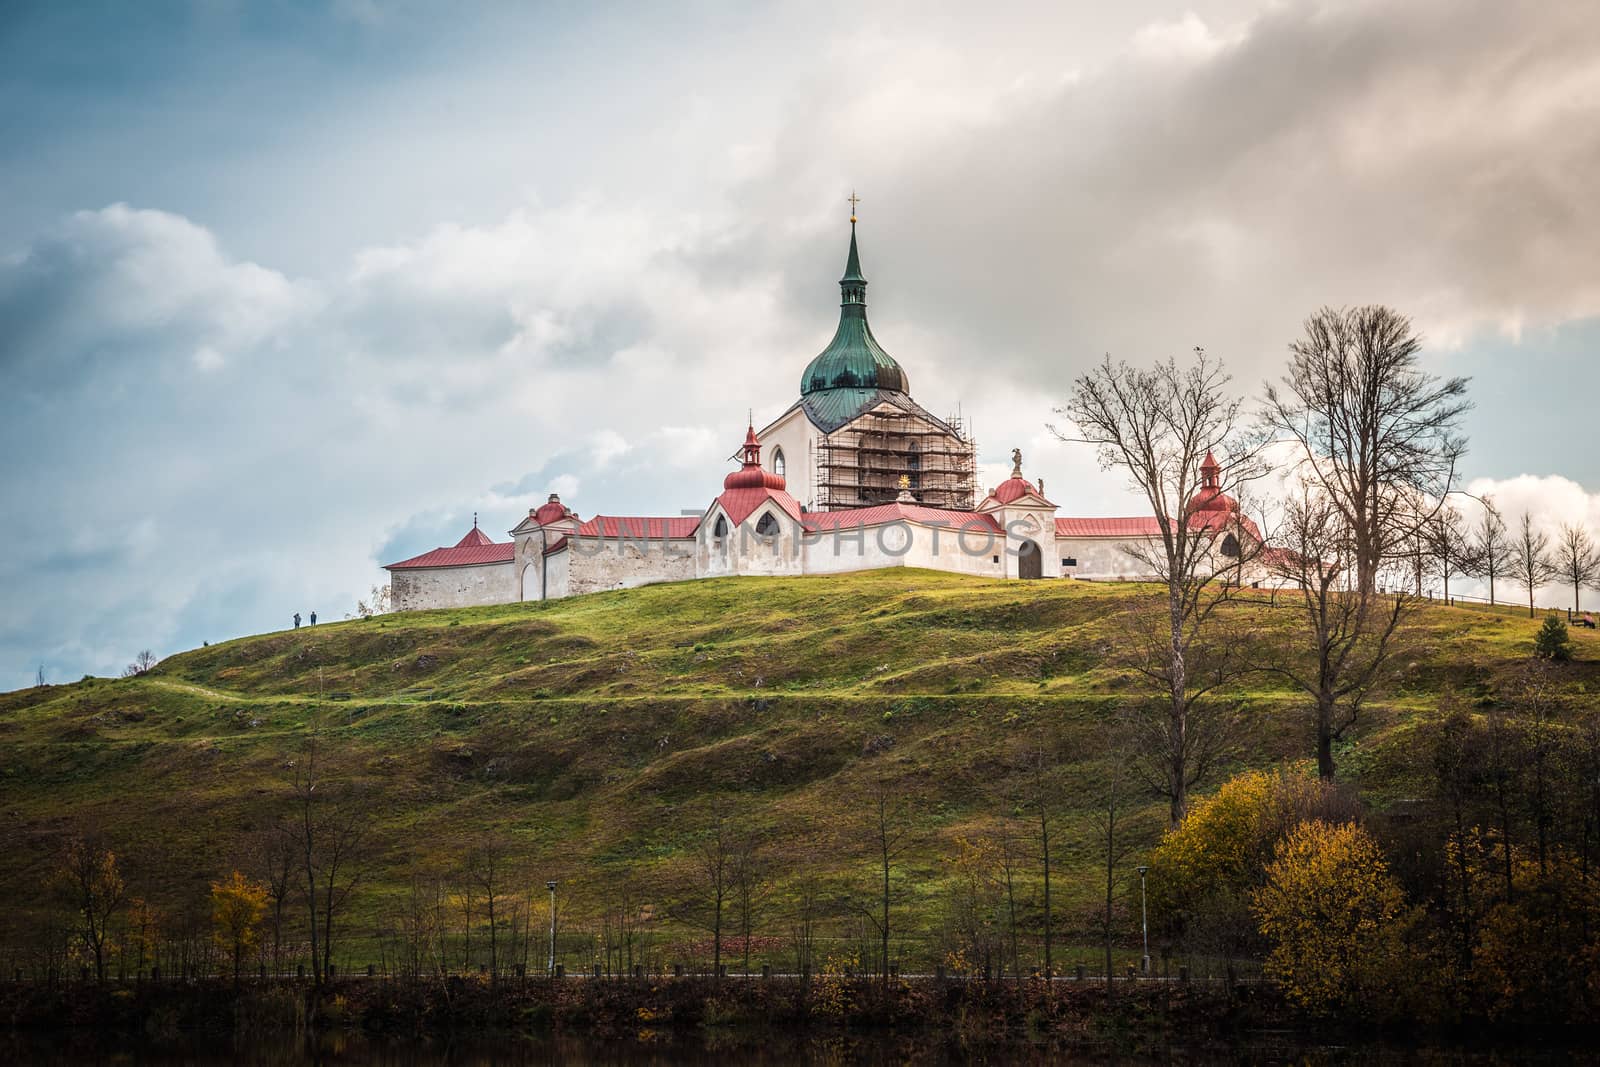 The pilgrimag church on Zelena Hora - Green Hill - Monument UNESCO. St. Jan Nepomucky Church panorama in autumn scene with reflection in the lake water. by petrsvoboda91